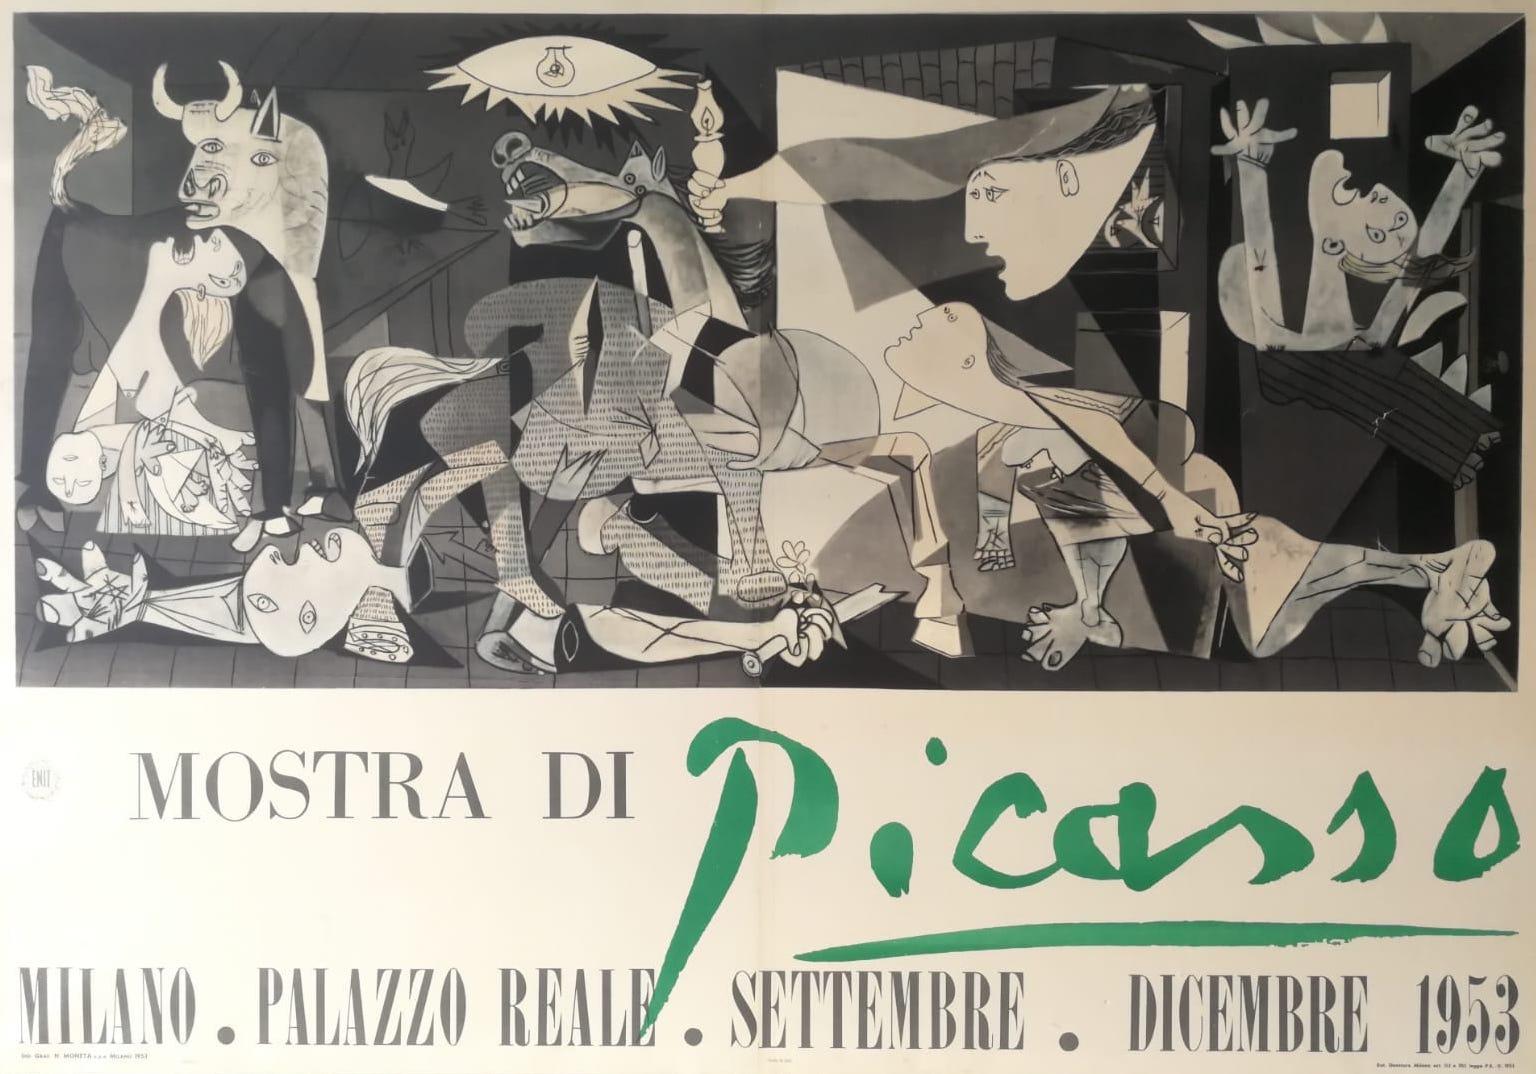 (after) Pablo Picasso Abstract Print - Picasso exhibition poster, "Mostra di Picasso, " depicting Guernica - 1953